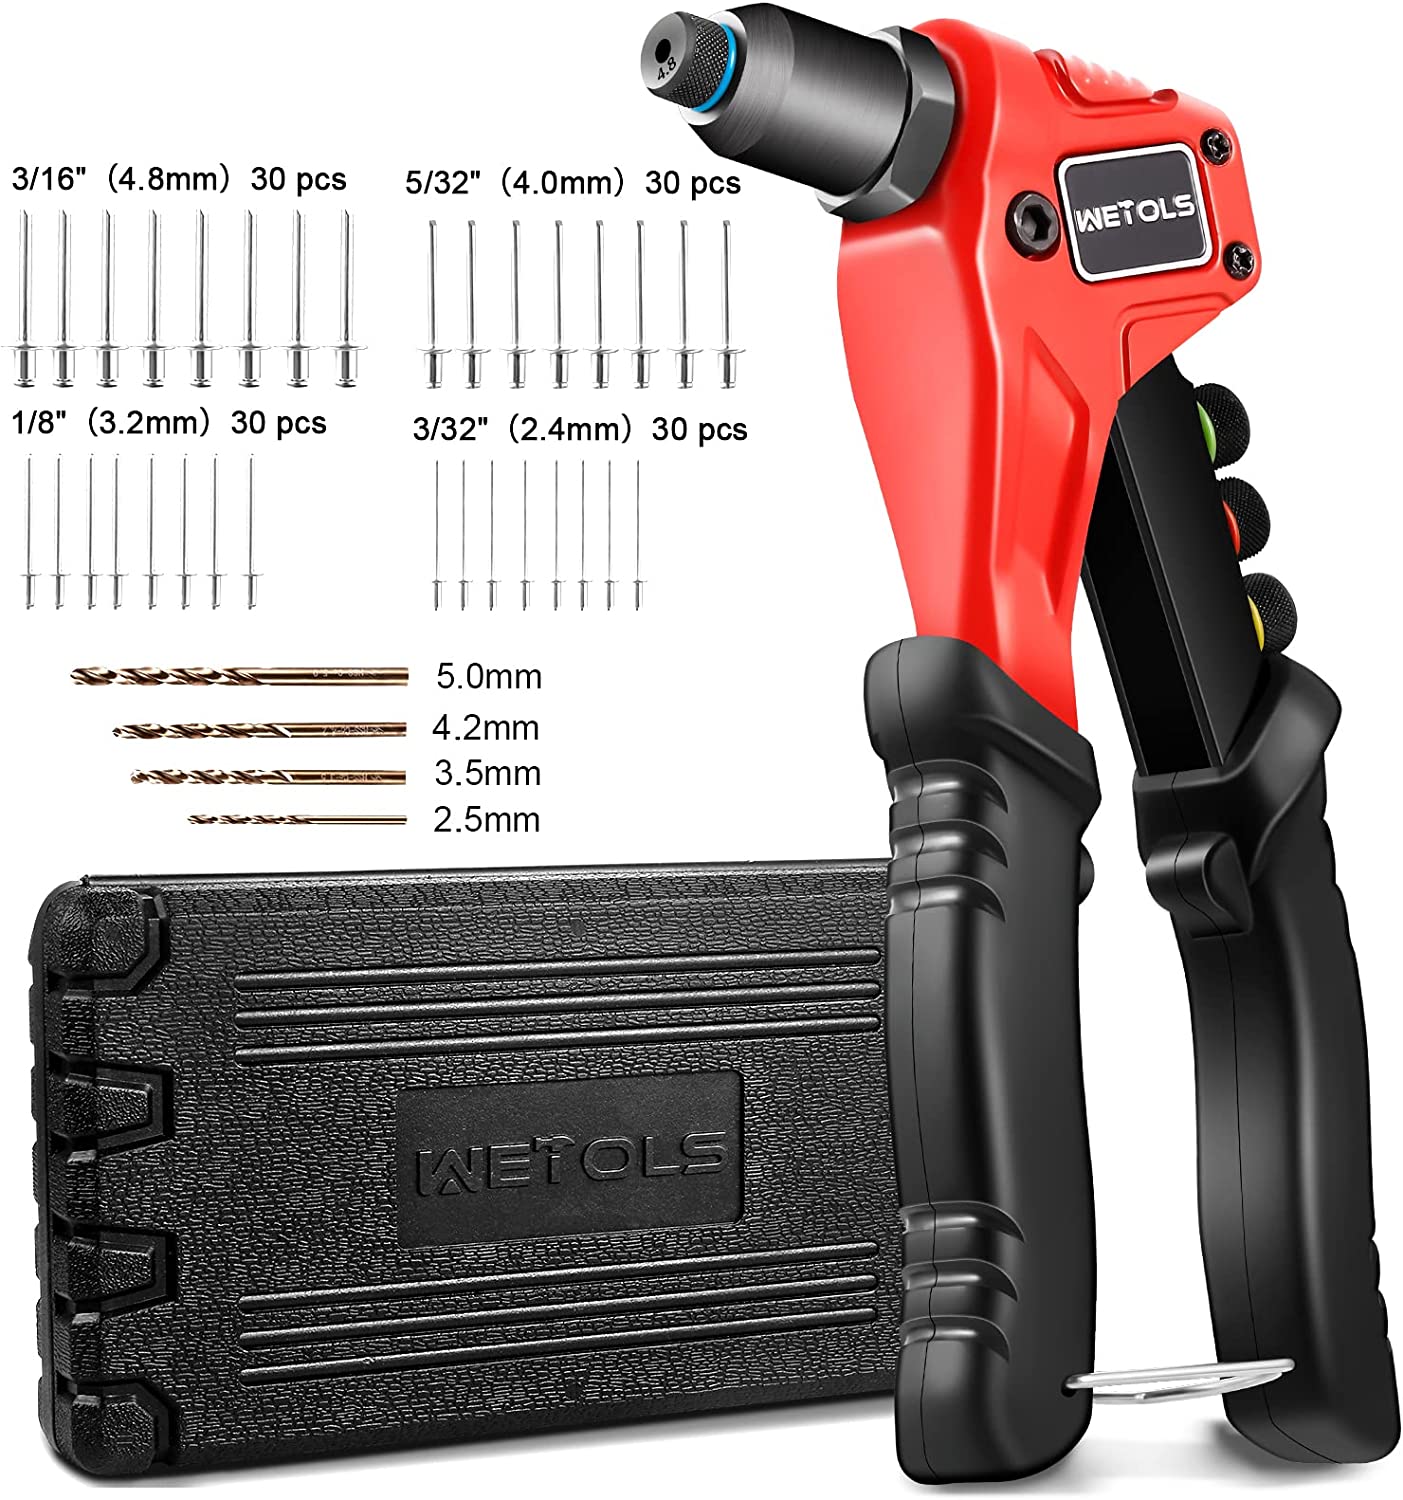 WETOLS All-In-One Tool-Free Riveter, 120-Piece